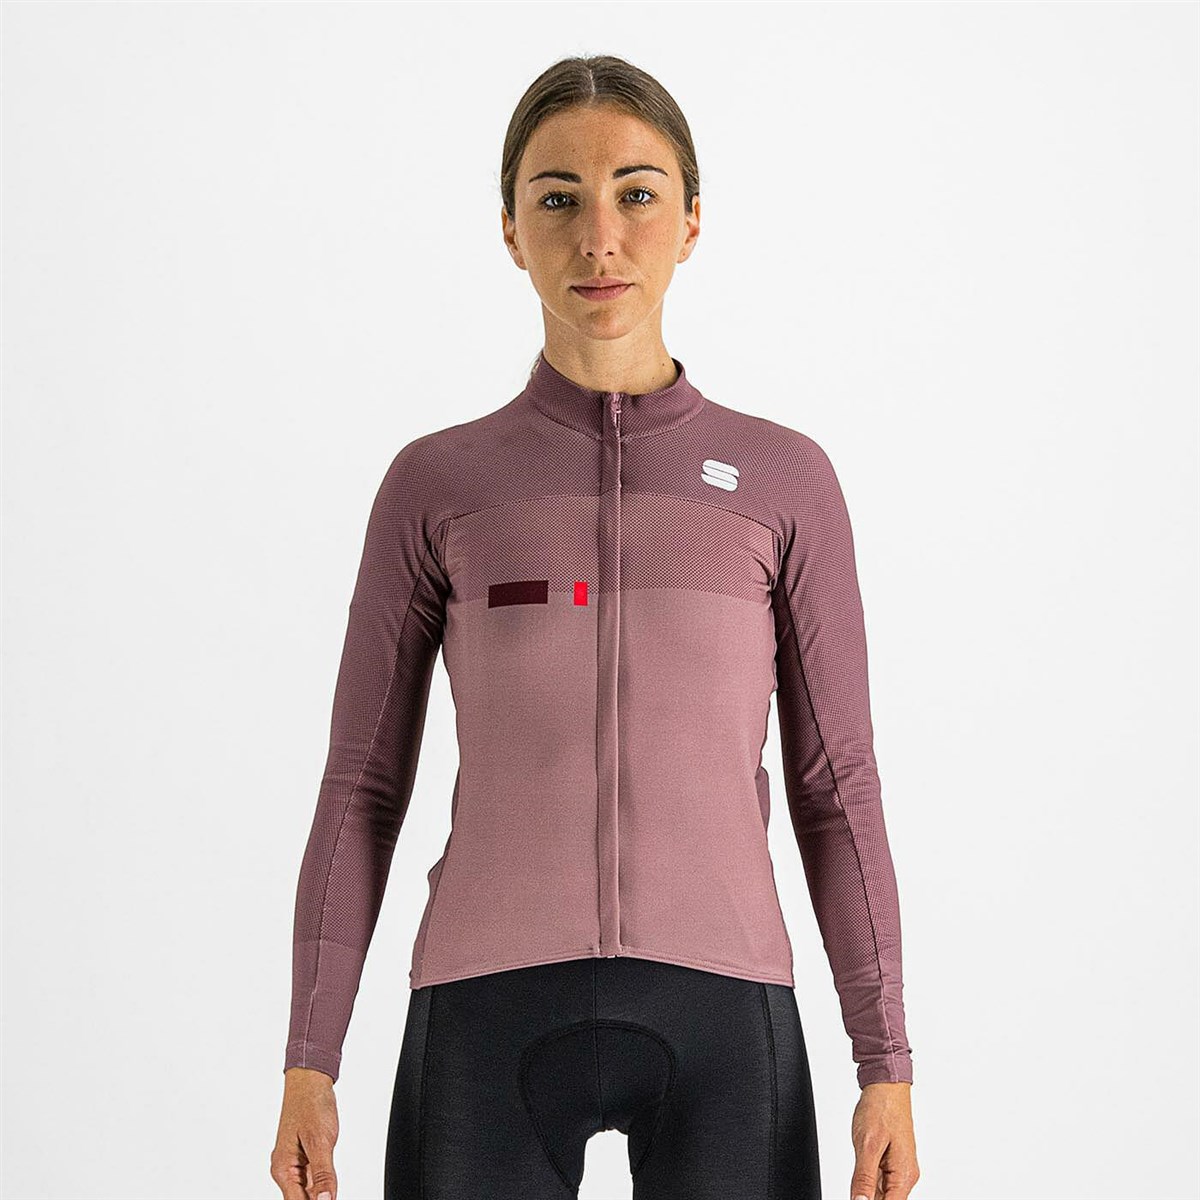 Sportful Bodyfit Pro Womens Thermal Long Sleeve Jersey product image